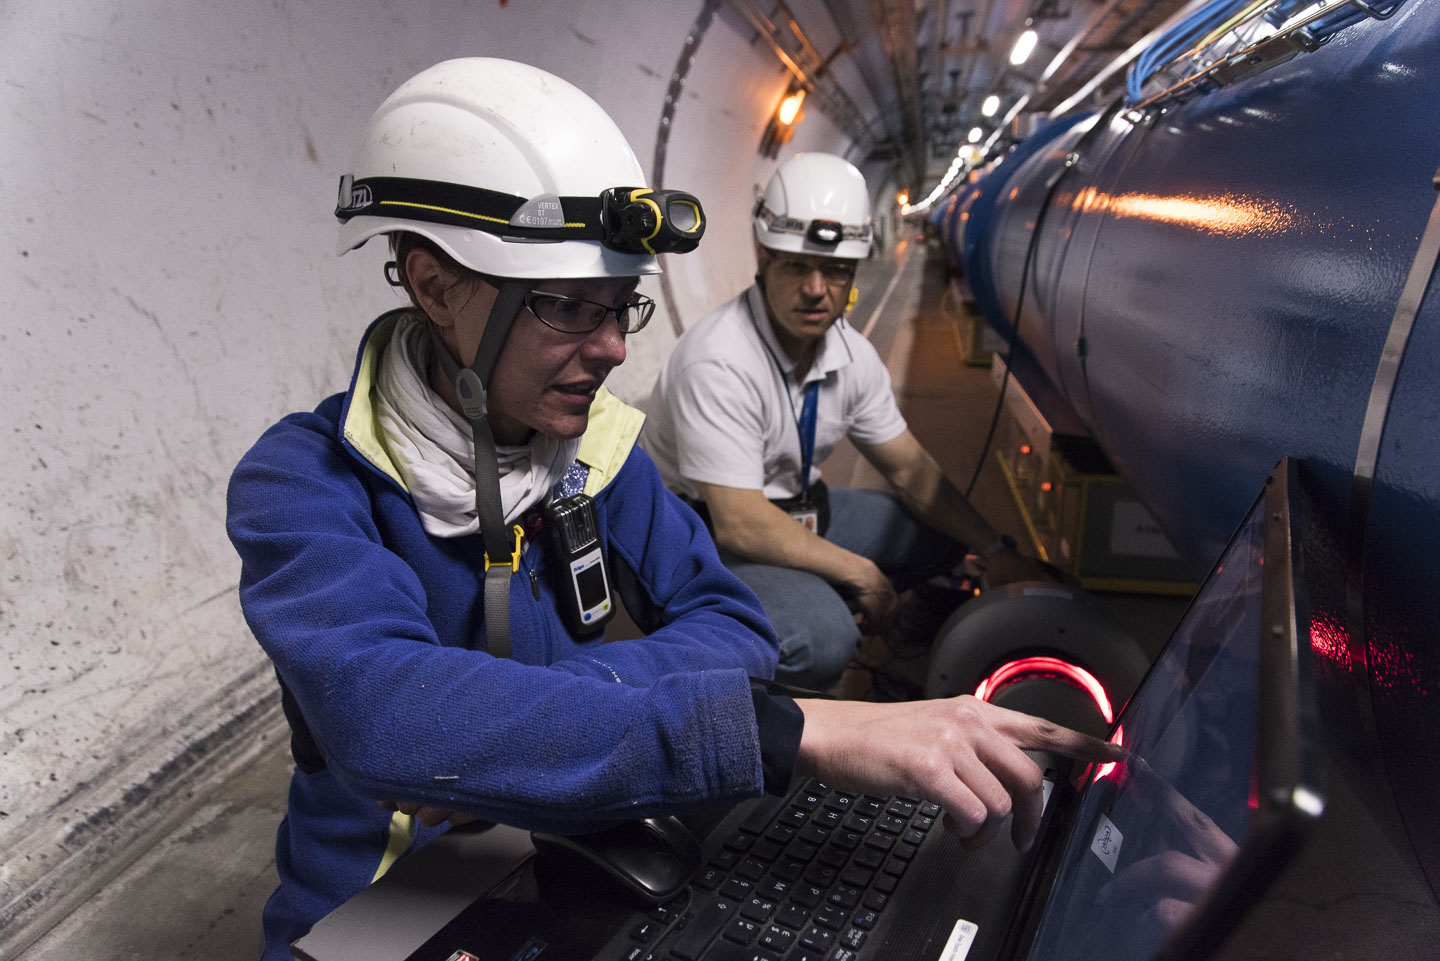 In pictures: X-rays probe LHC for cause of short circuit 